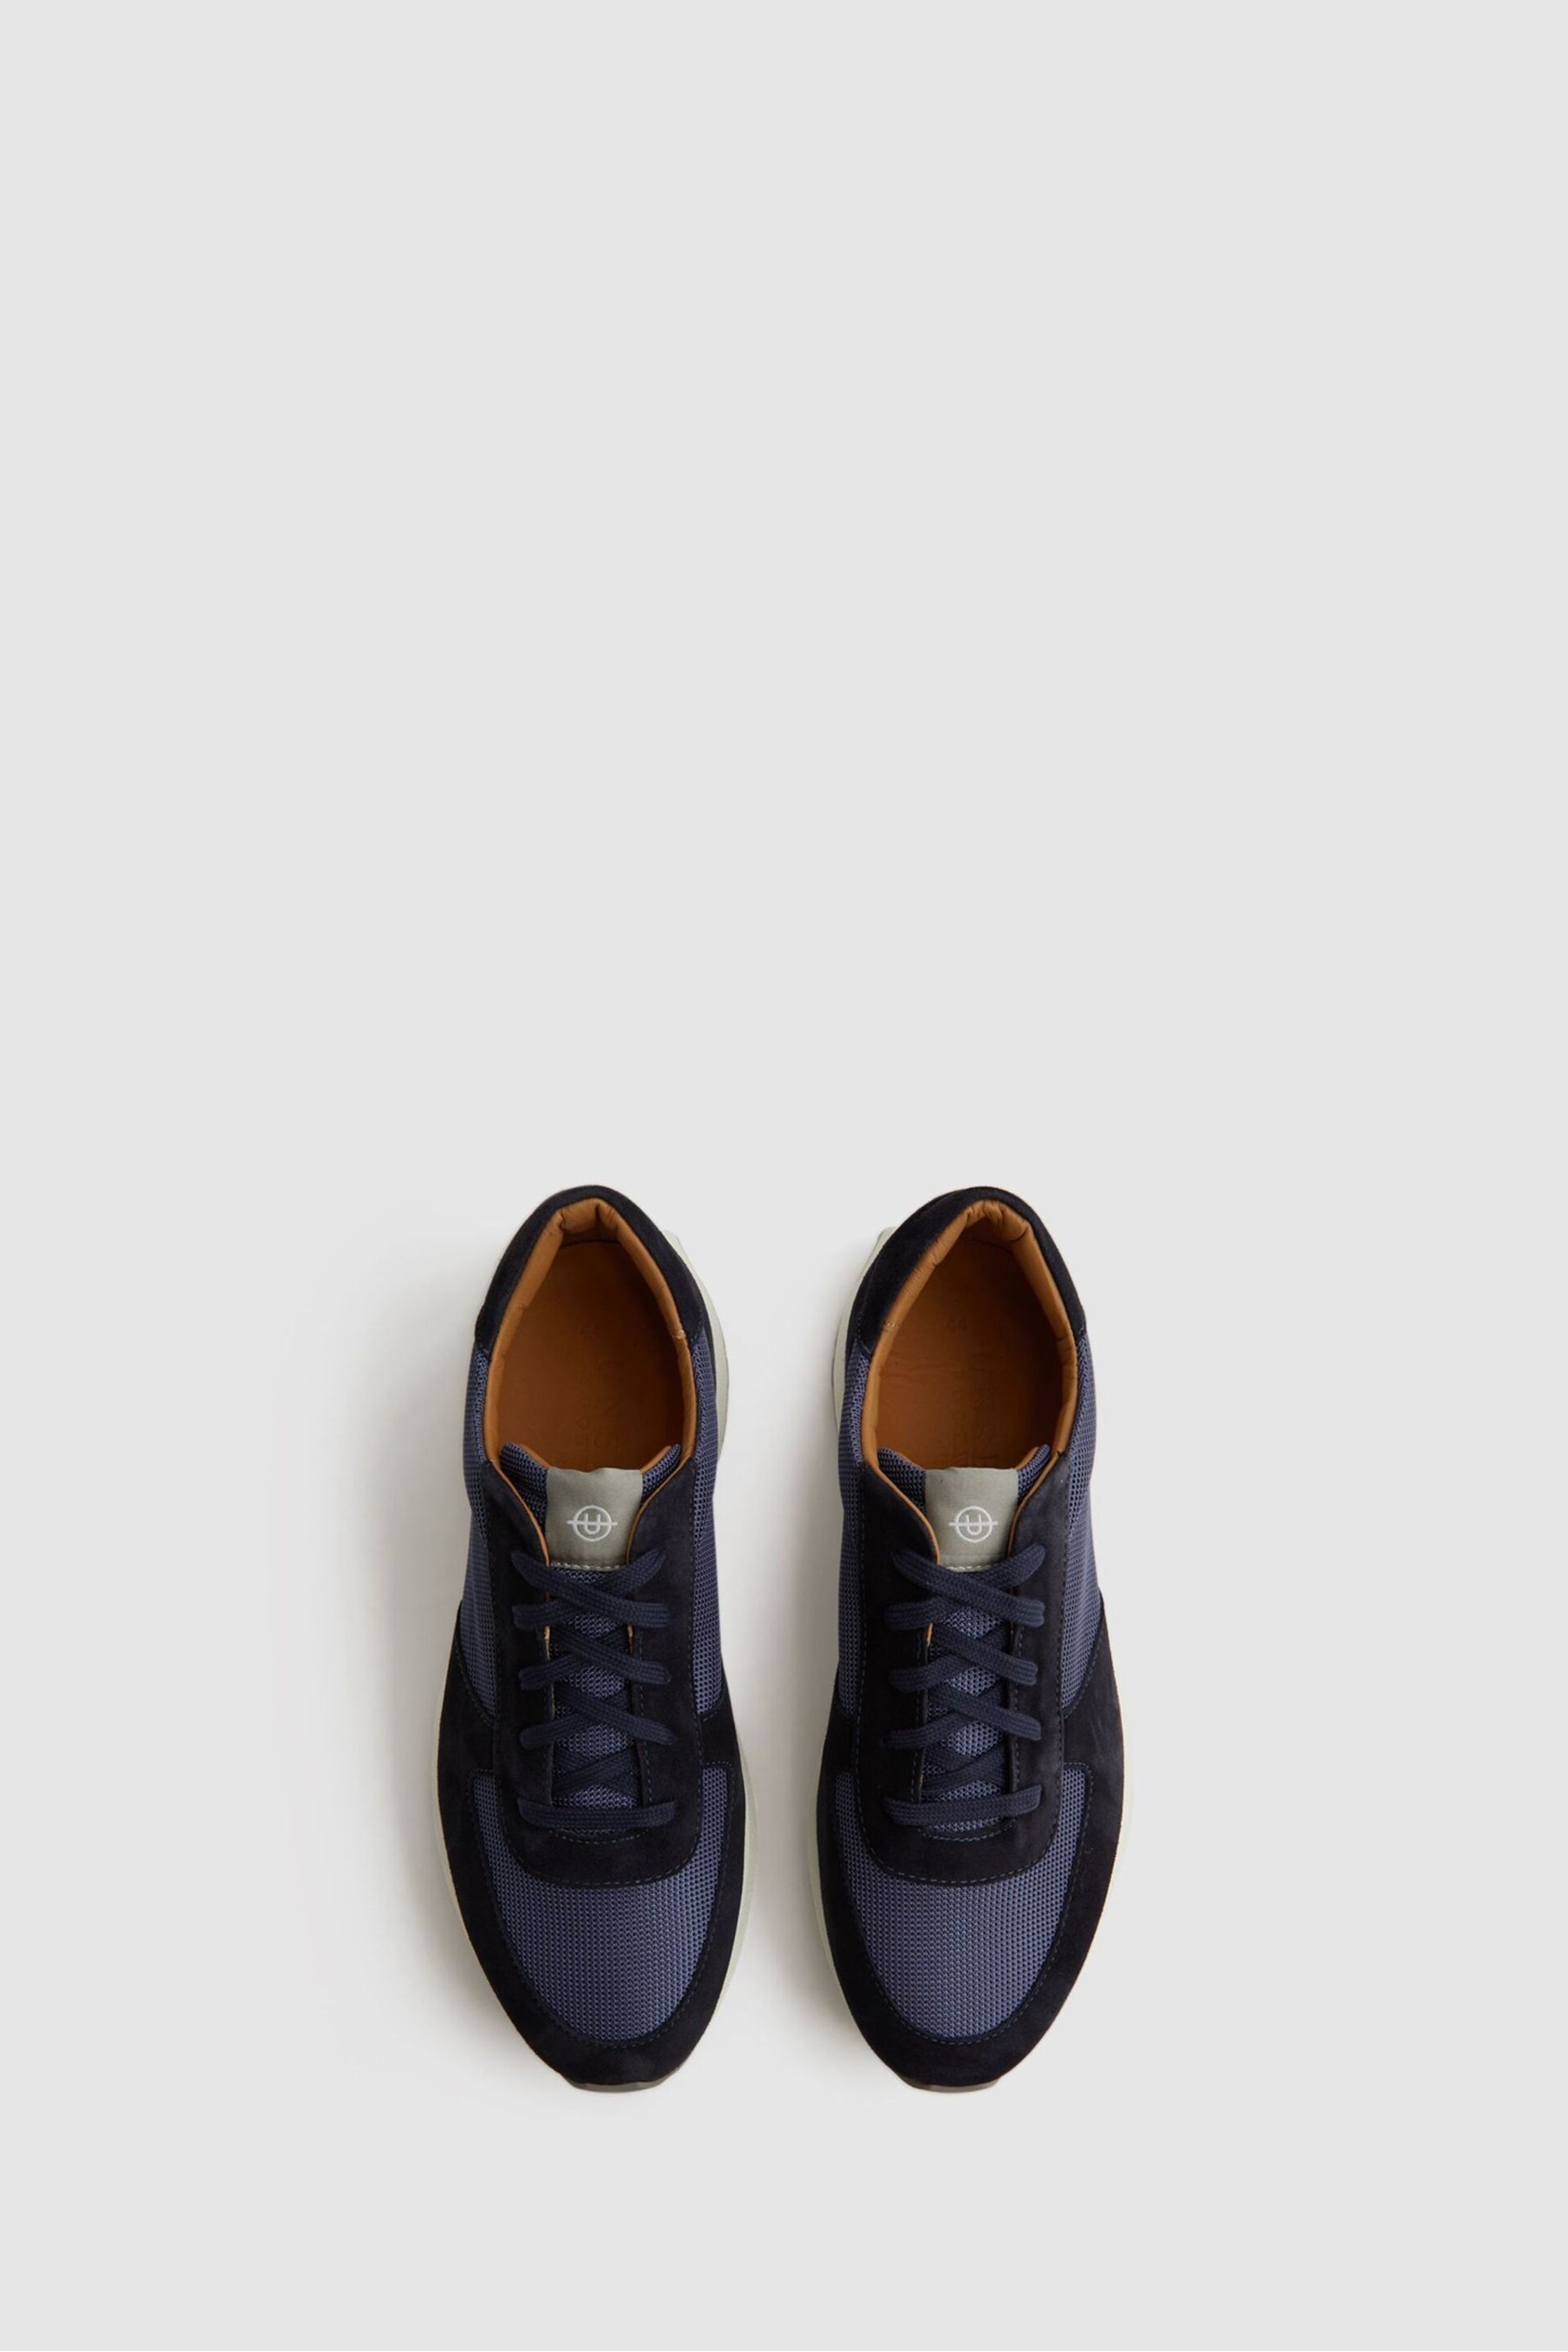 Reiss Blue/Navy Trinity Tech Unseen Trinity Tech Trainers - Image 4 of 8